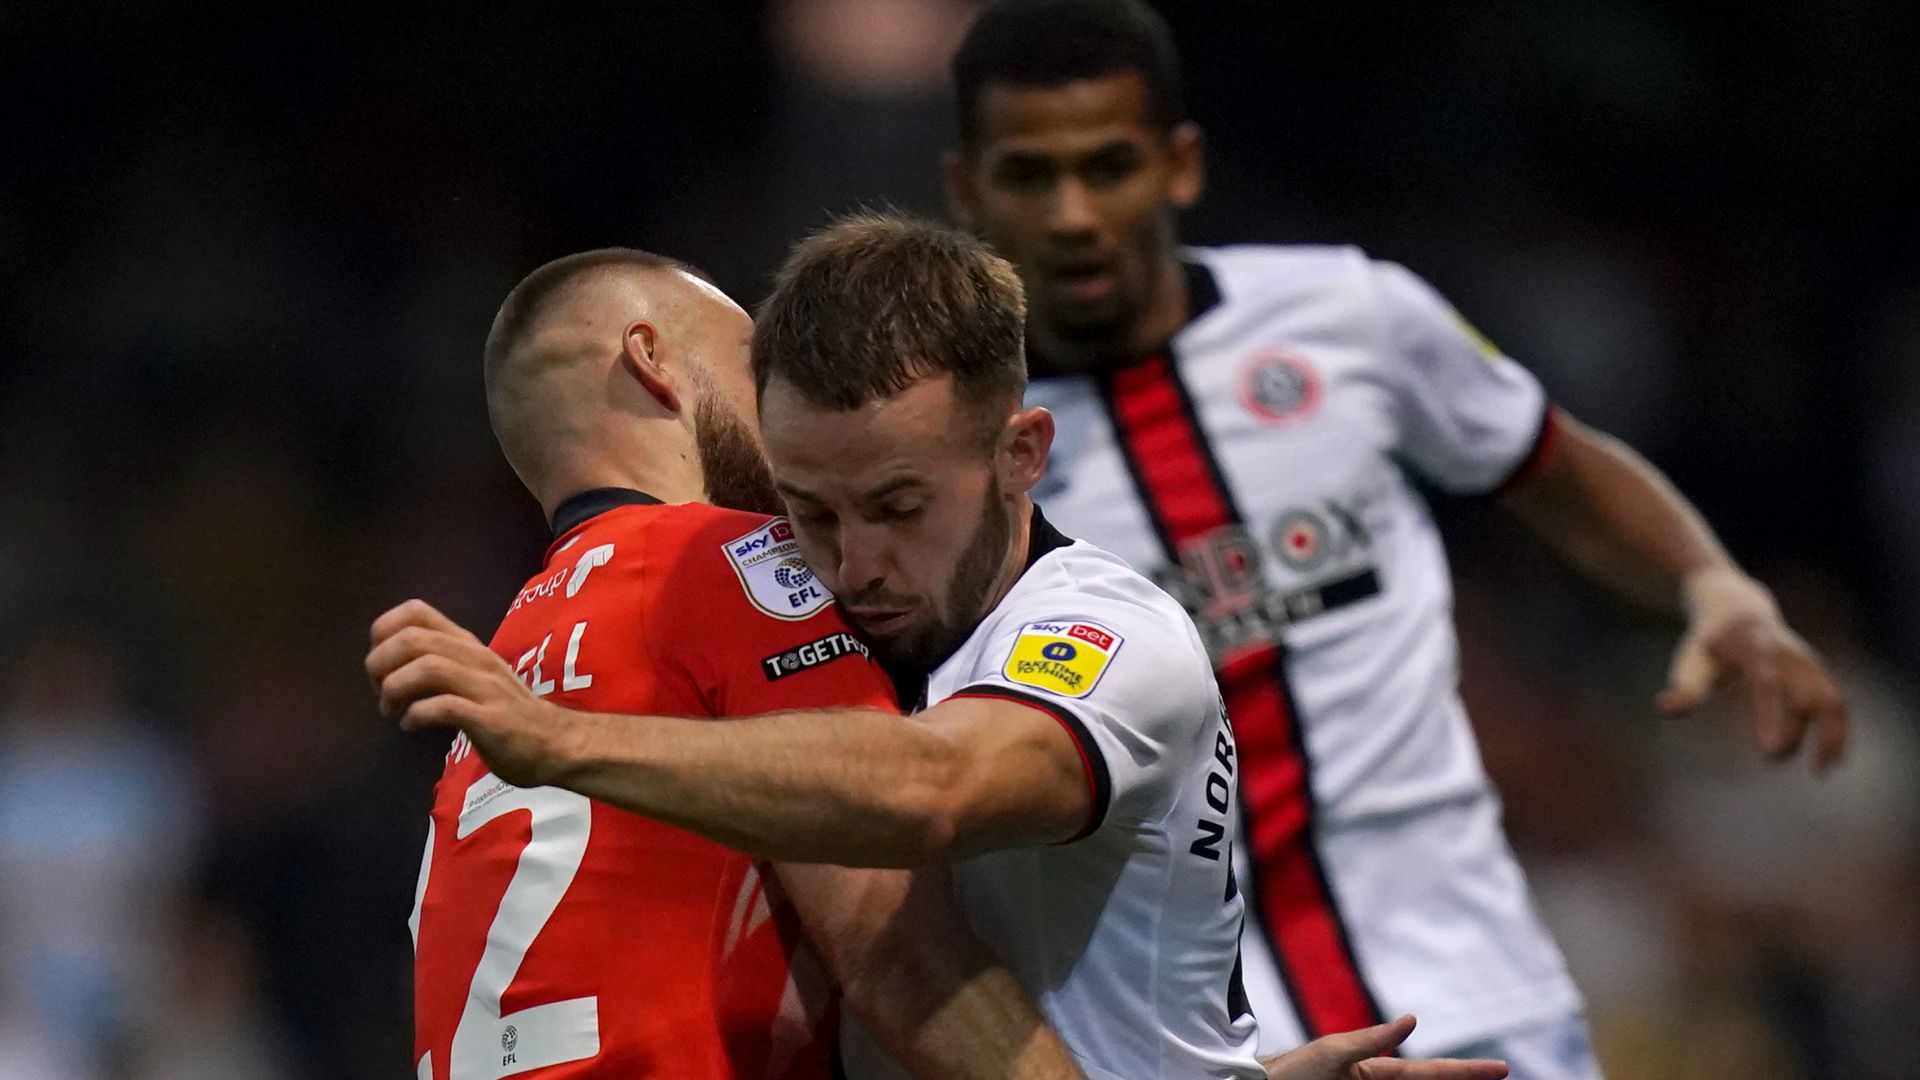 Sheff Utd consolidate top spot with Luton draw